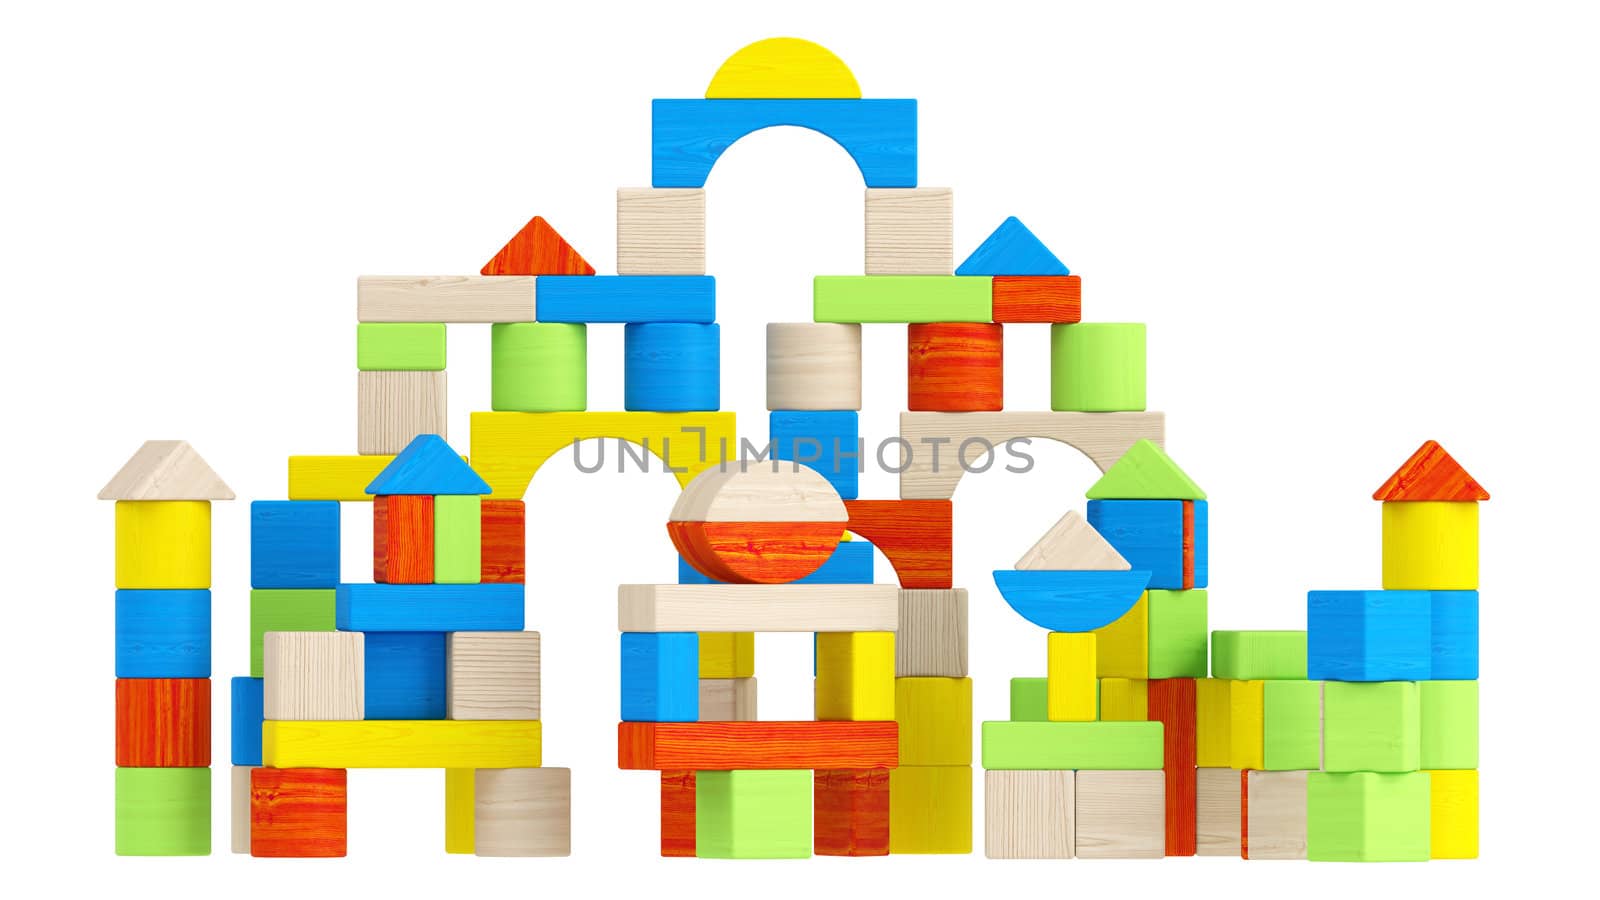 Colourful array of different building blocks by AlexanderMorozov